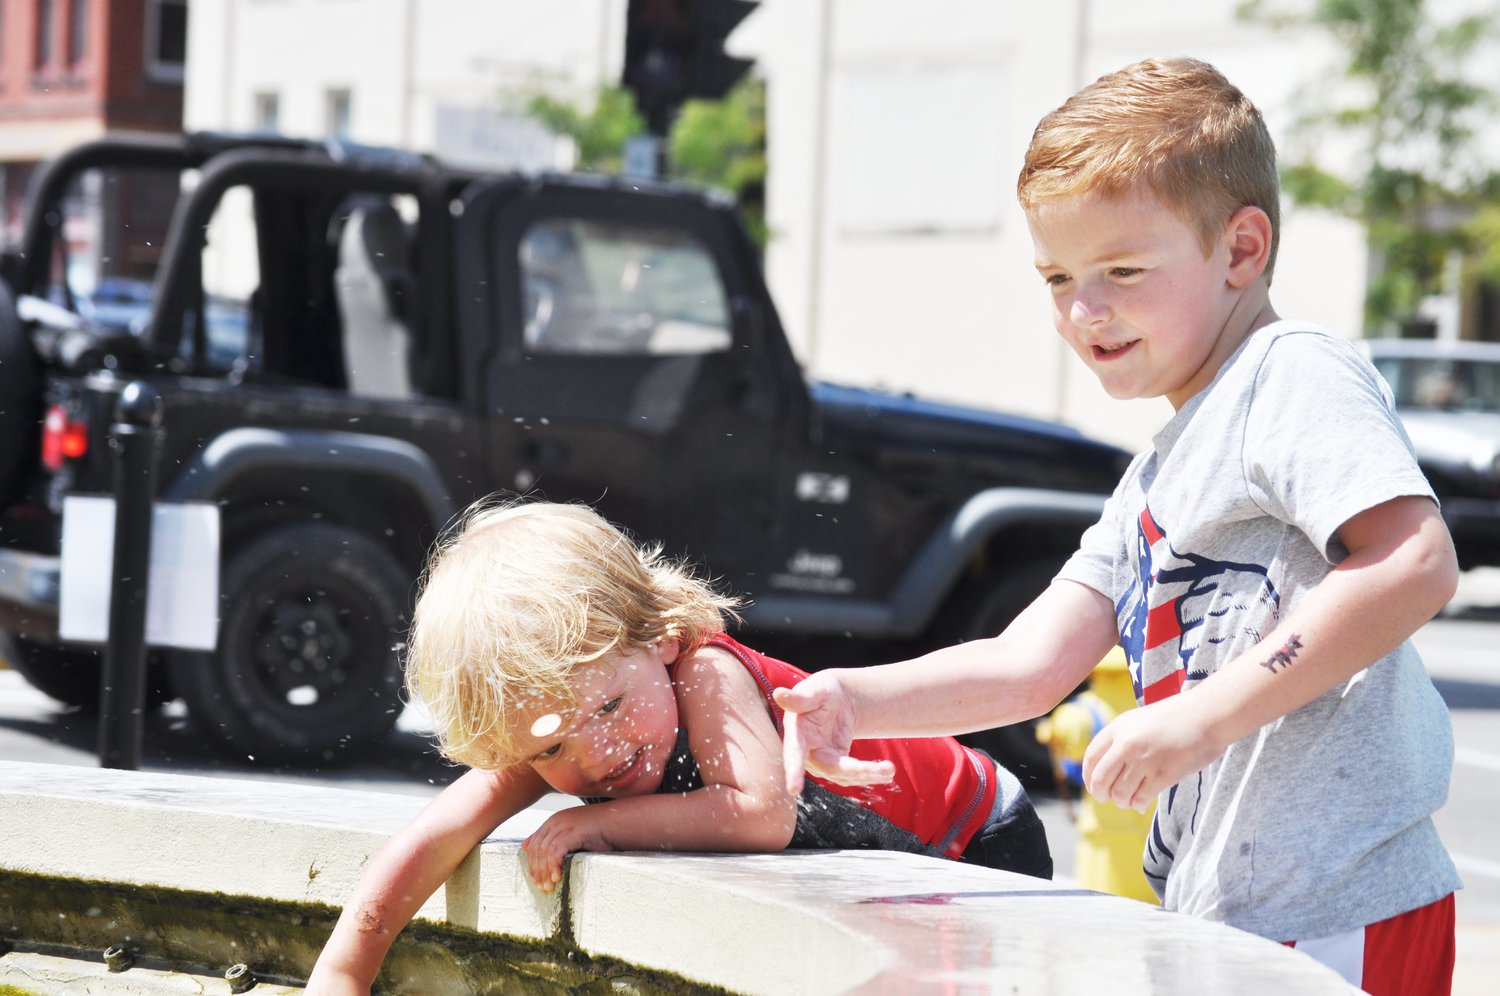 Aden Beck, 6, right, and his brother, Mathis, 2, play in the fountain at Marie Canine Plaza during Lunch on the Plaza 2.0 Friday.